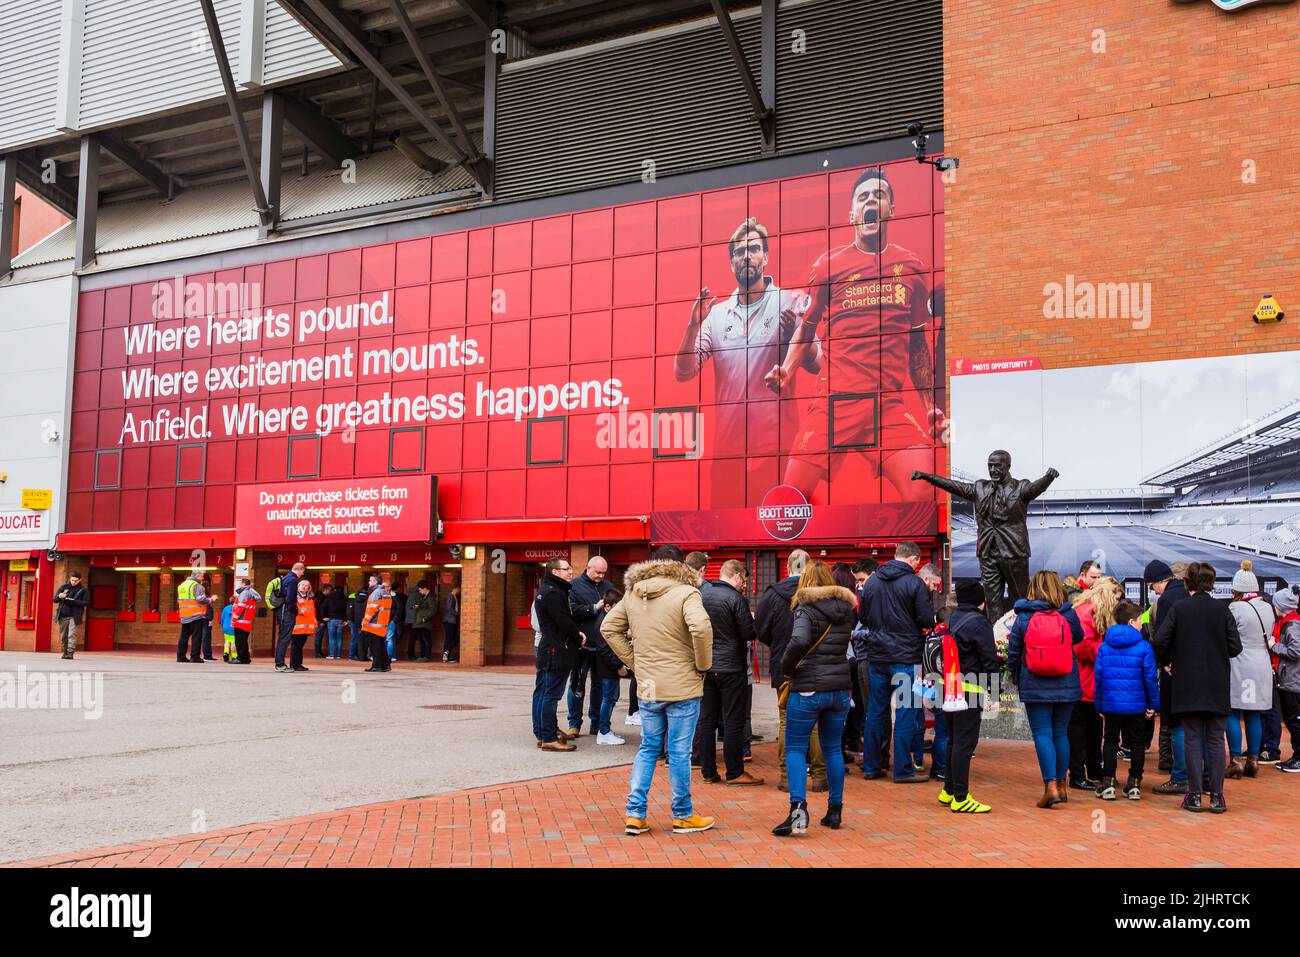 Liverpool F.C. supporters next to the Bill Shankly statue at Anfield Stadium. Anfield, Liverpool, Merseyside, Lancashire, England, United Kingdom Stock Photo